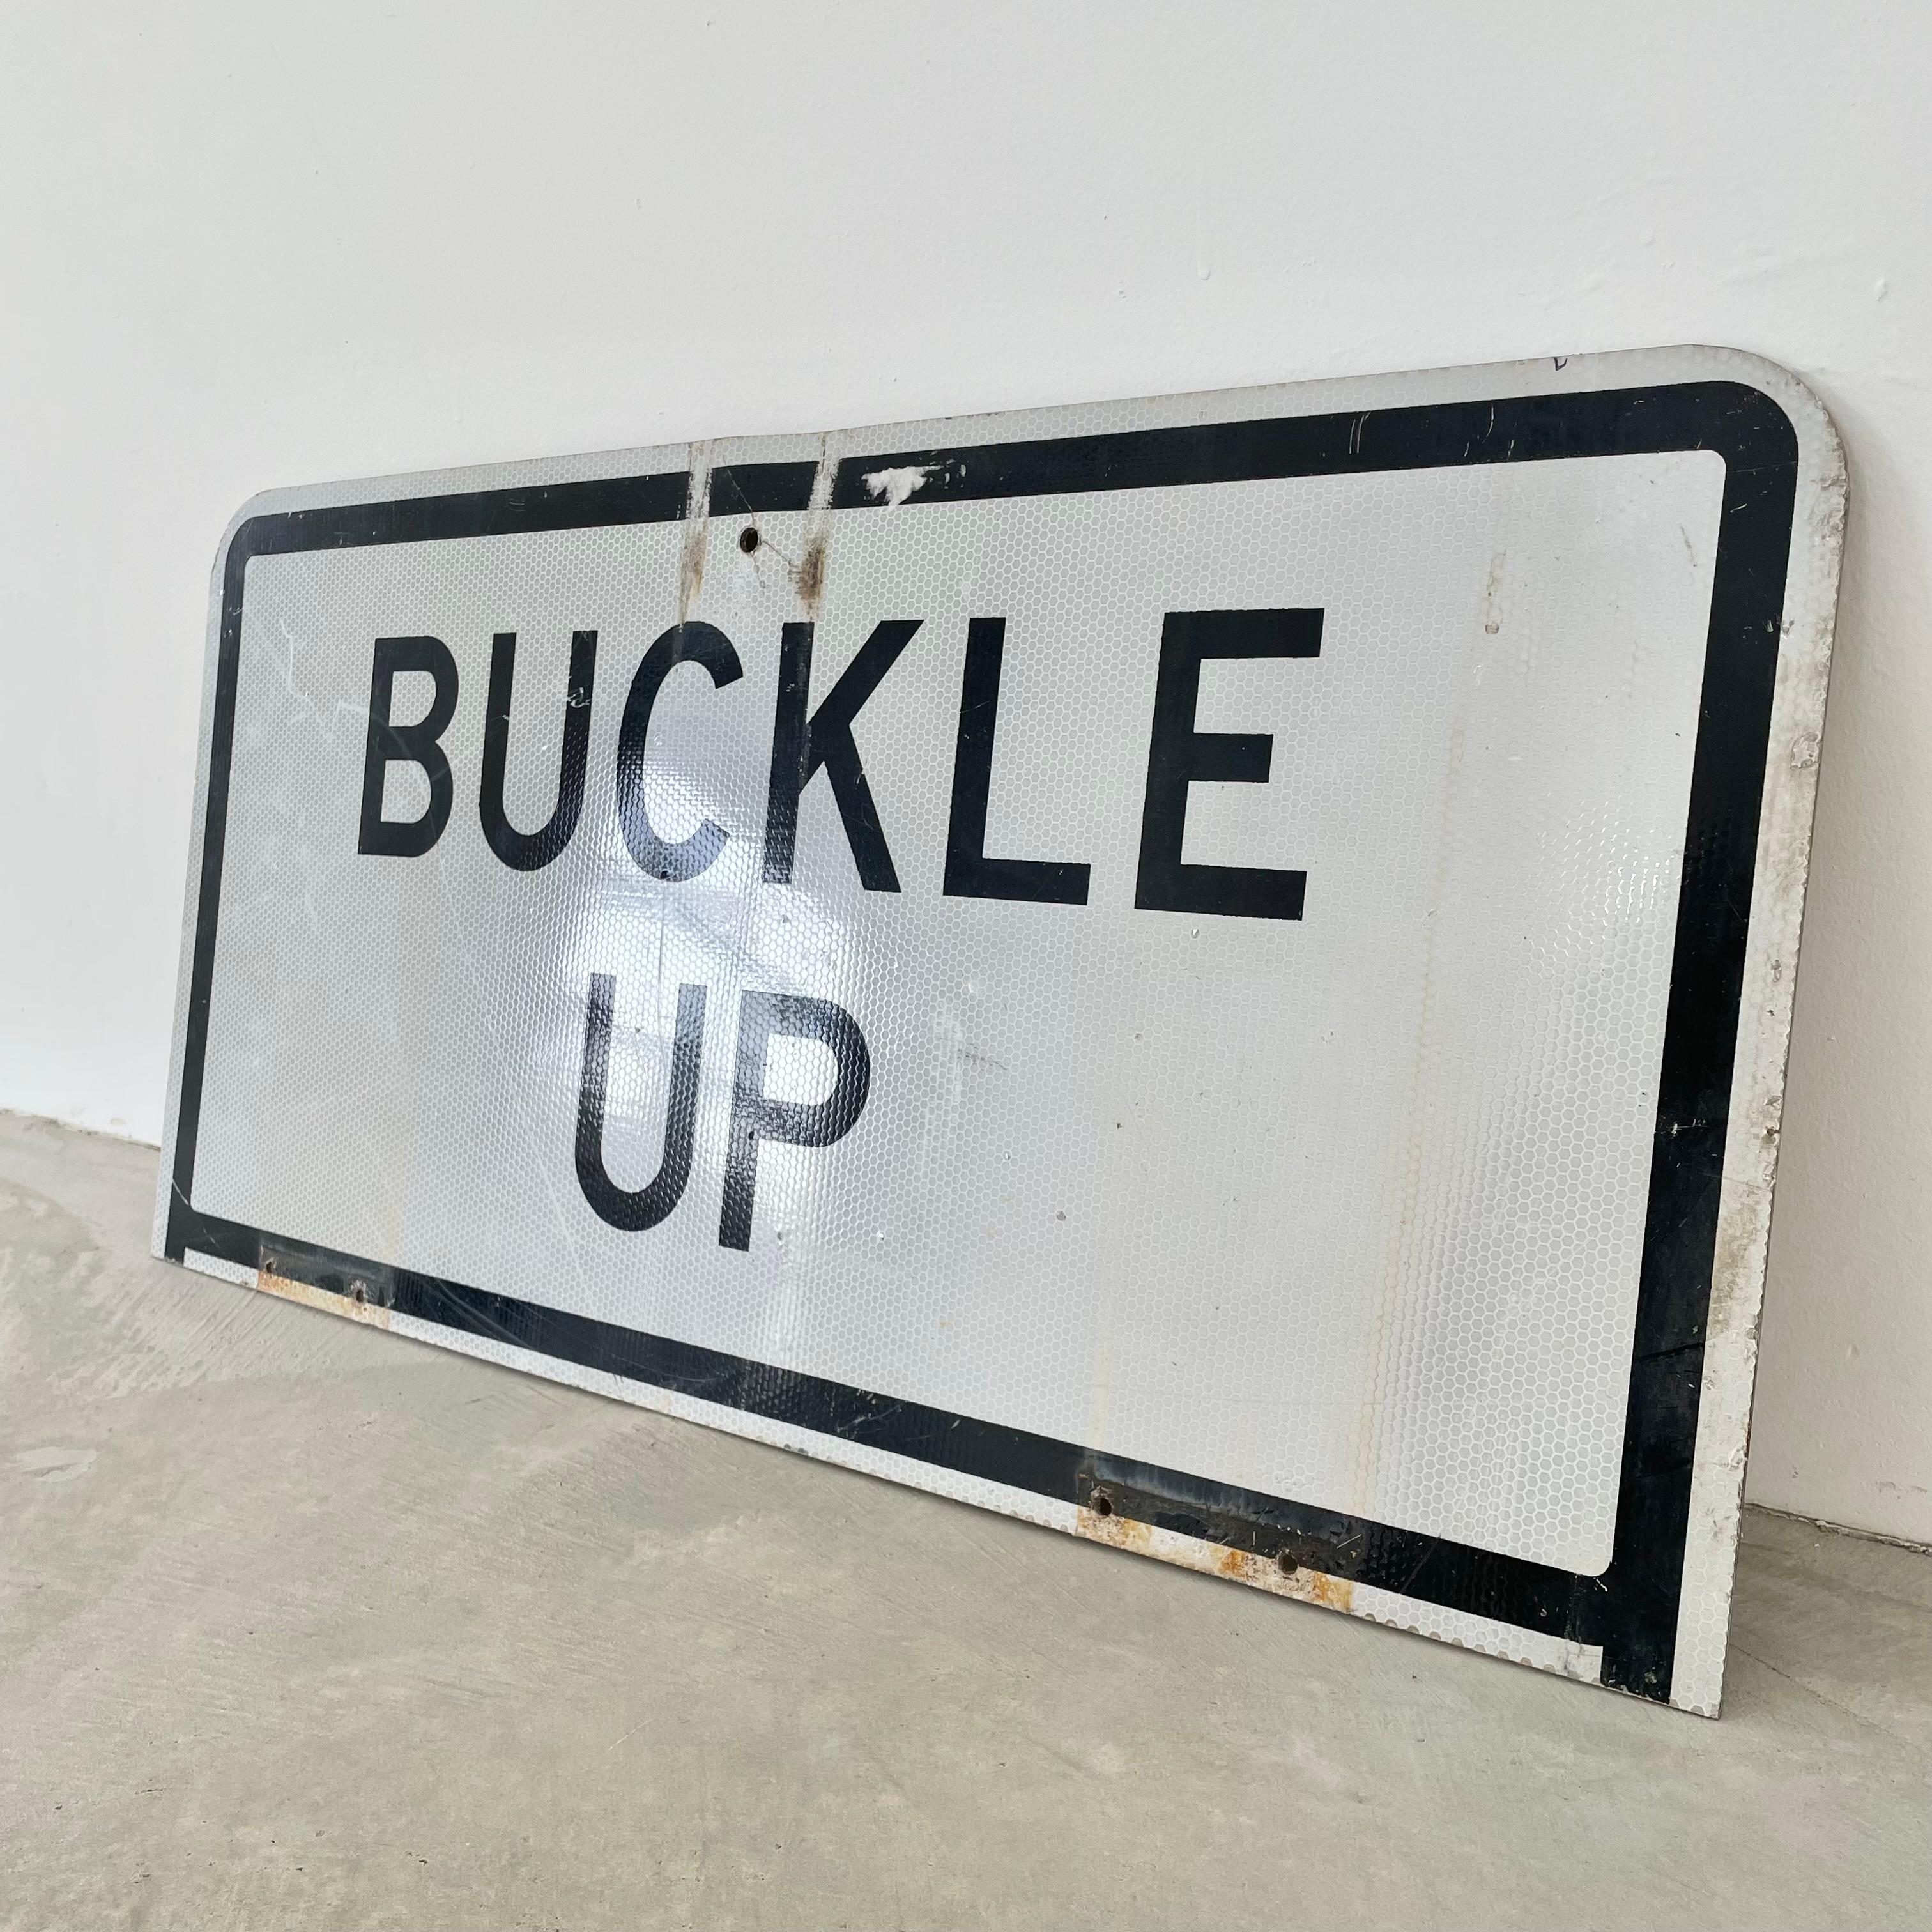 buckle up sign